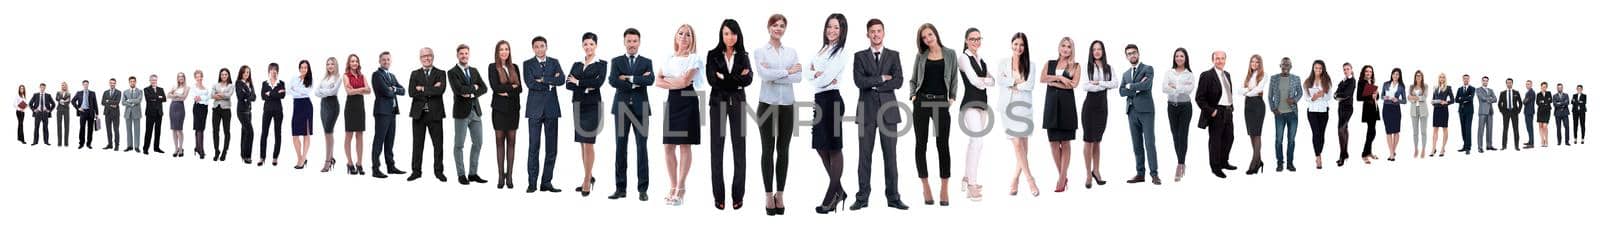 leader and professional business team standing together.isolated on white background.